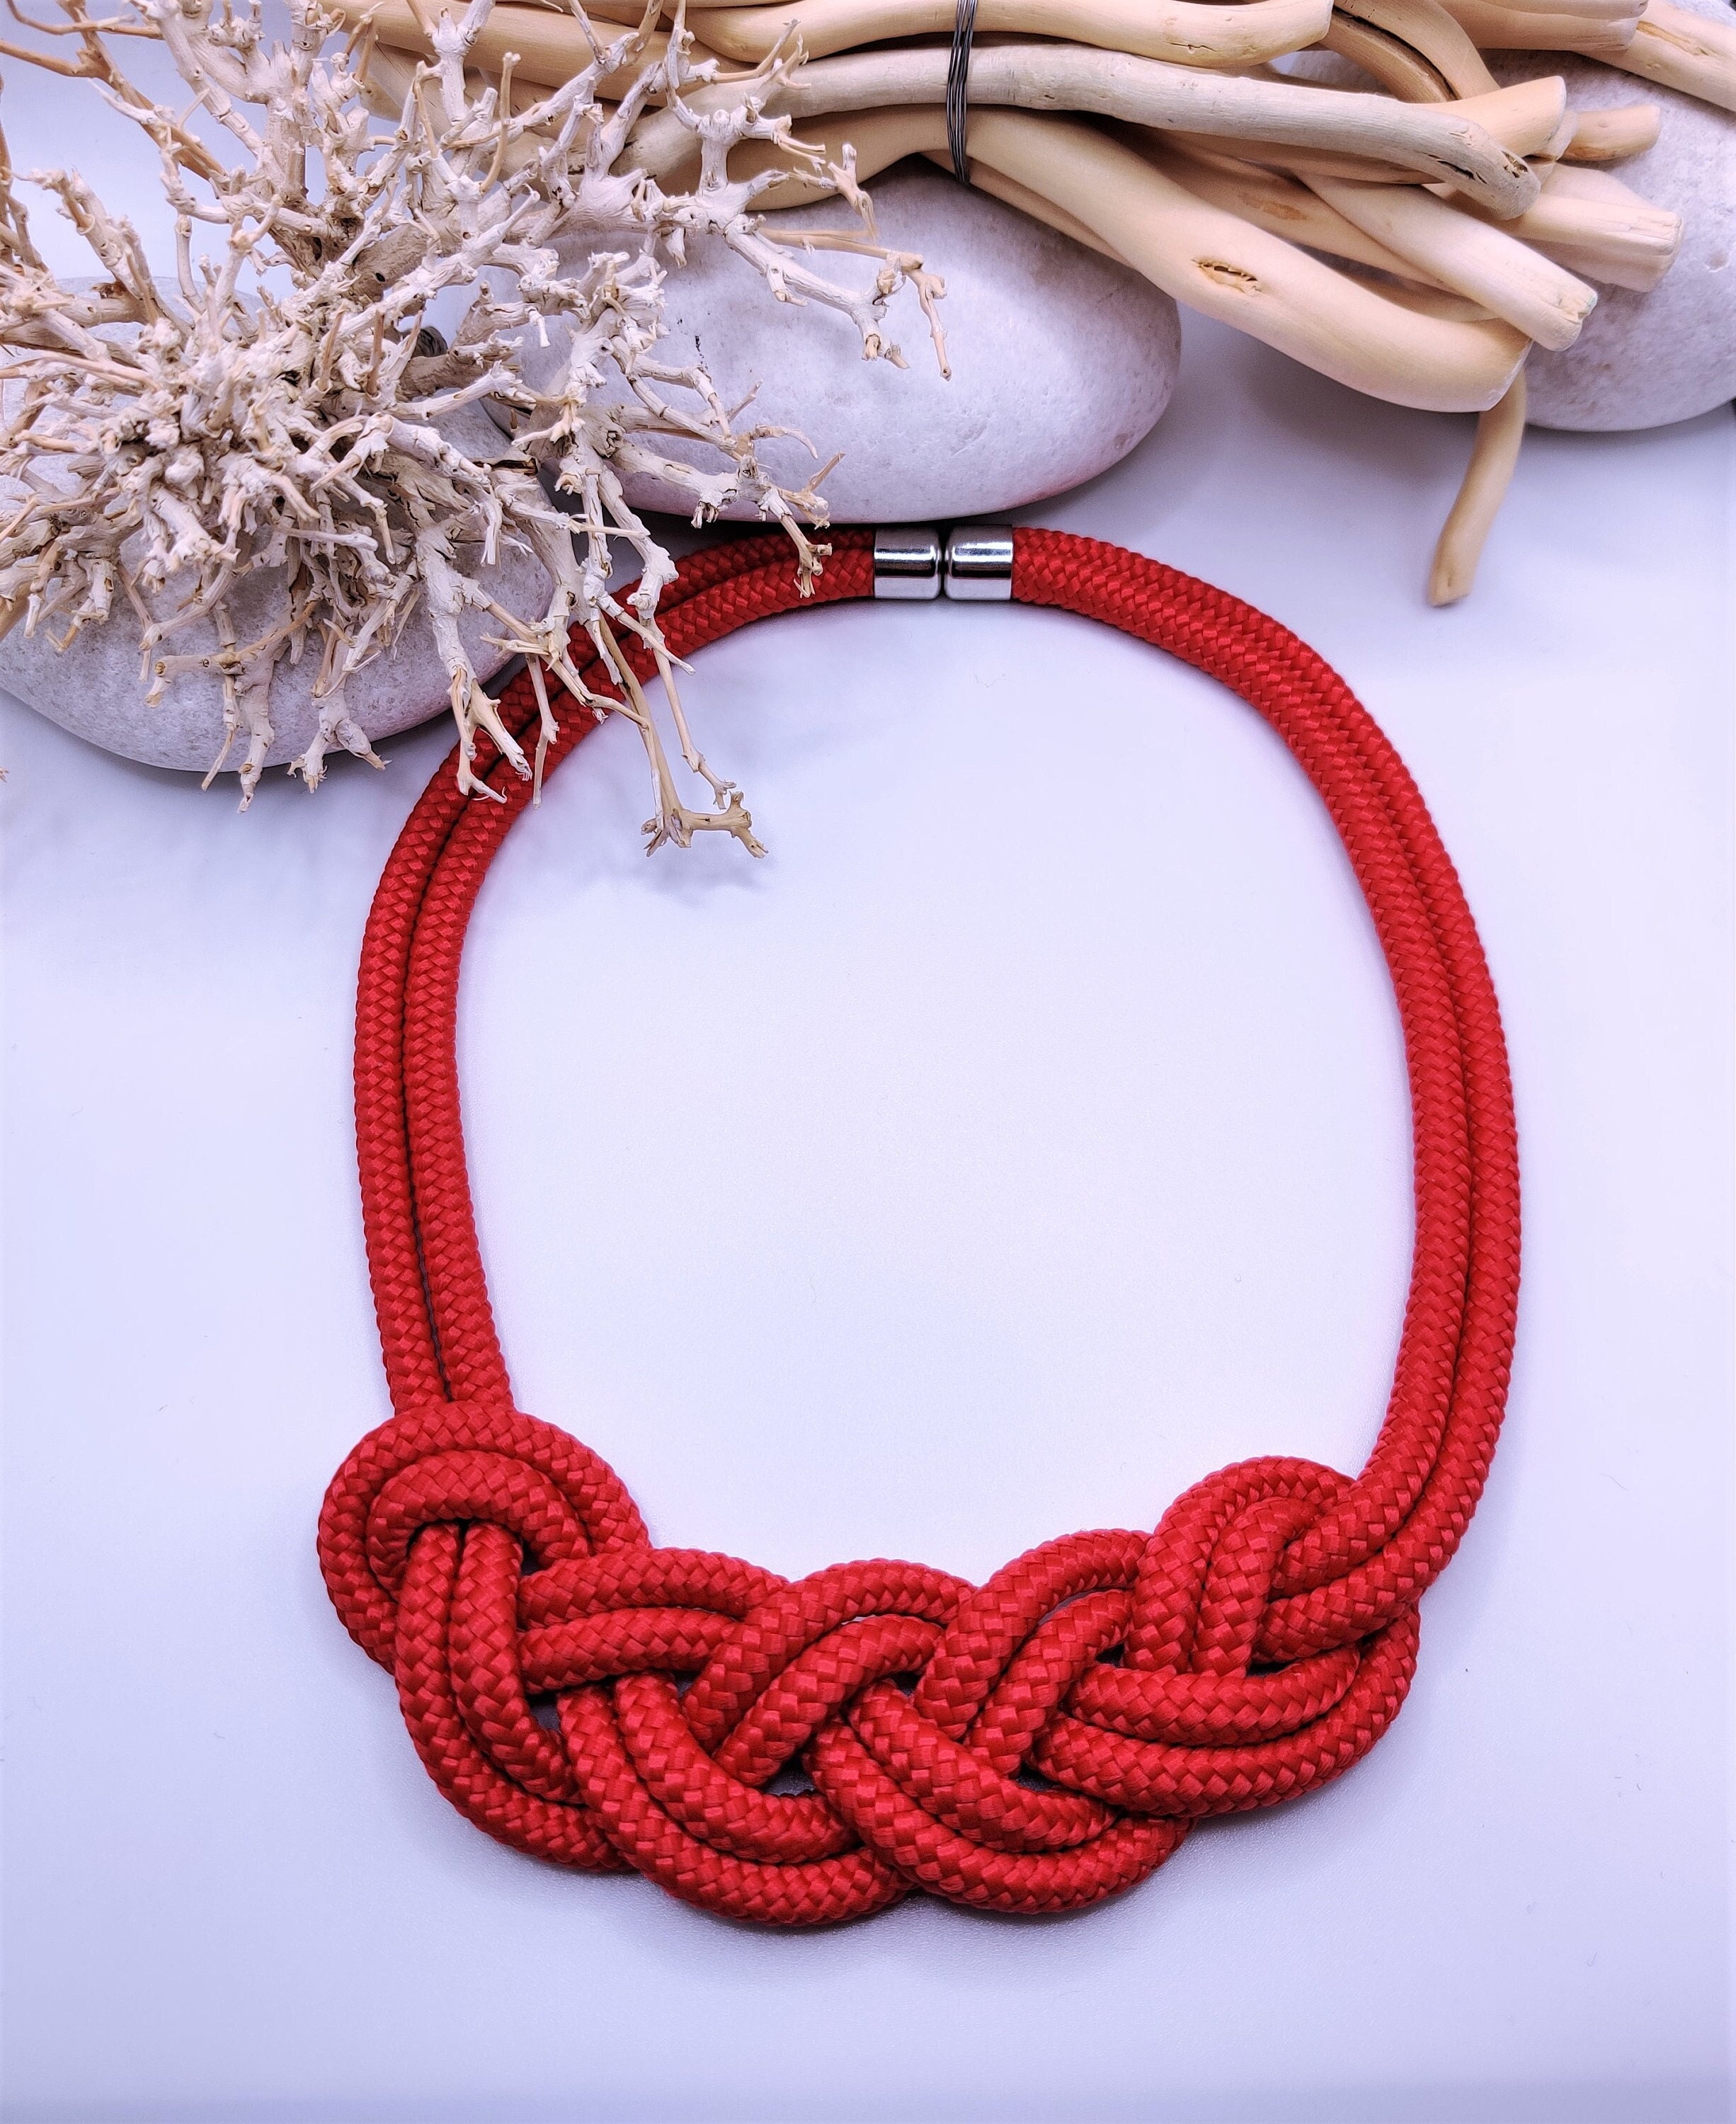 Baseball Necklace - Sports Braided Rope